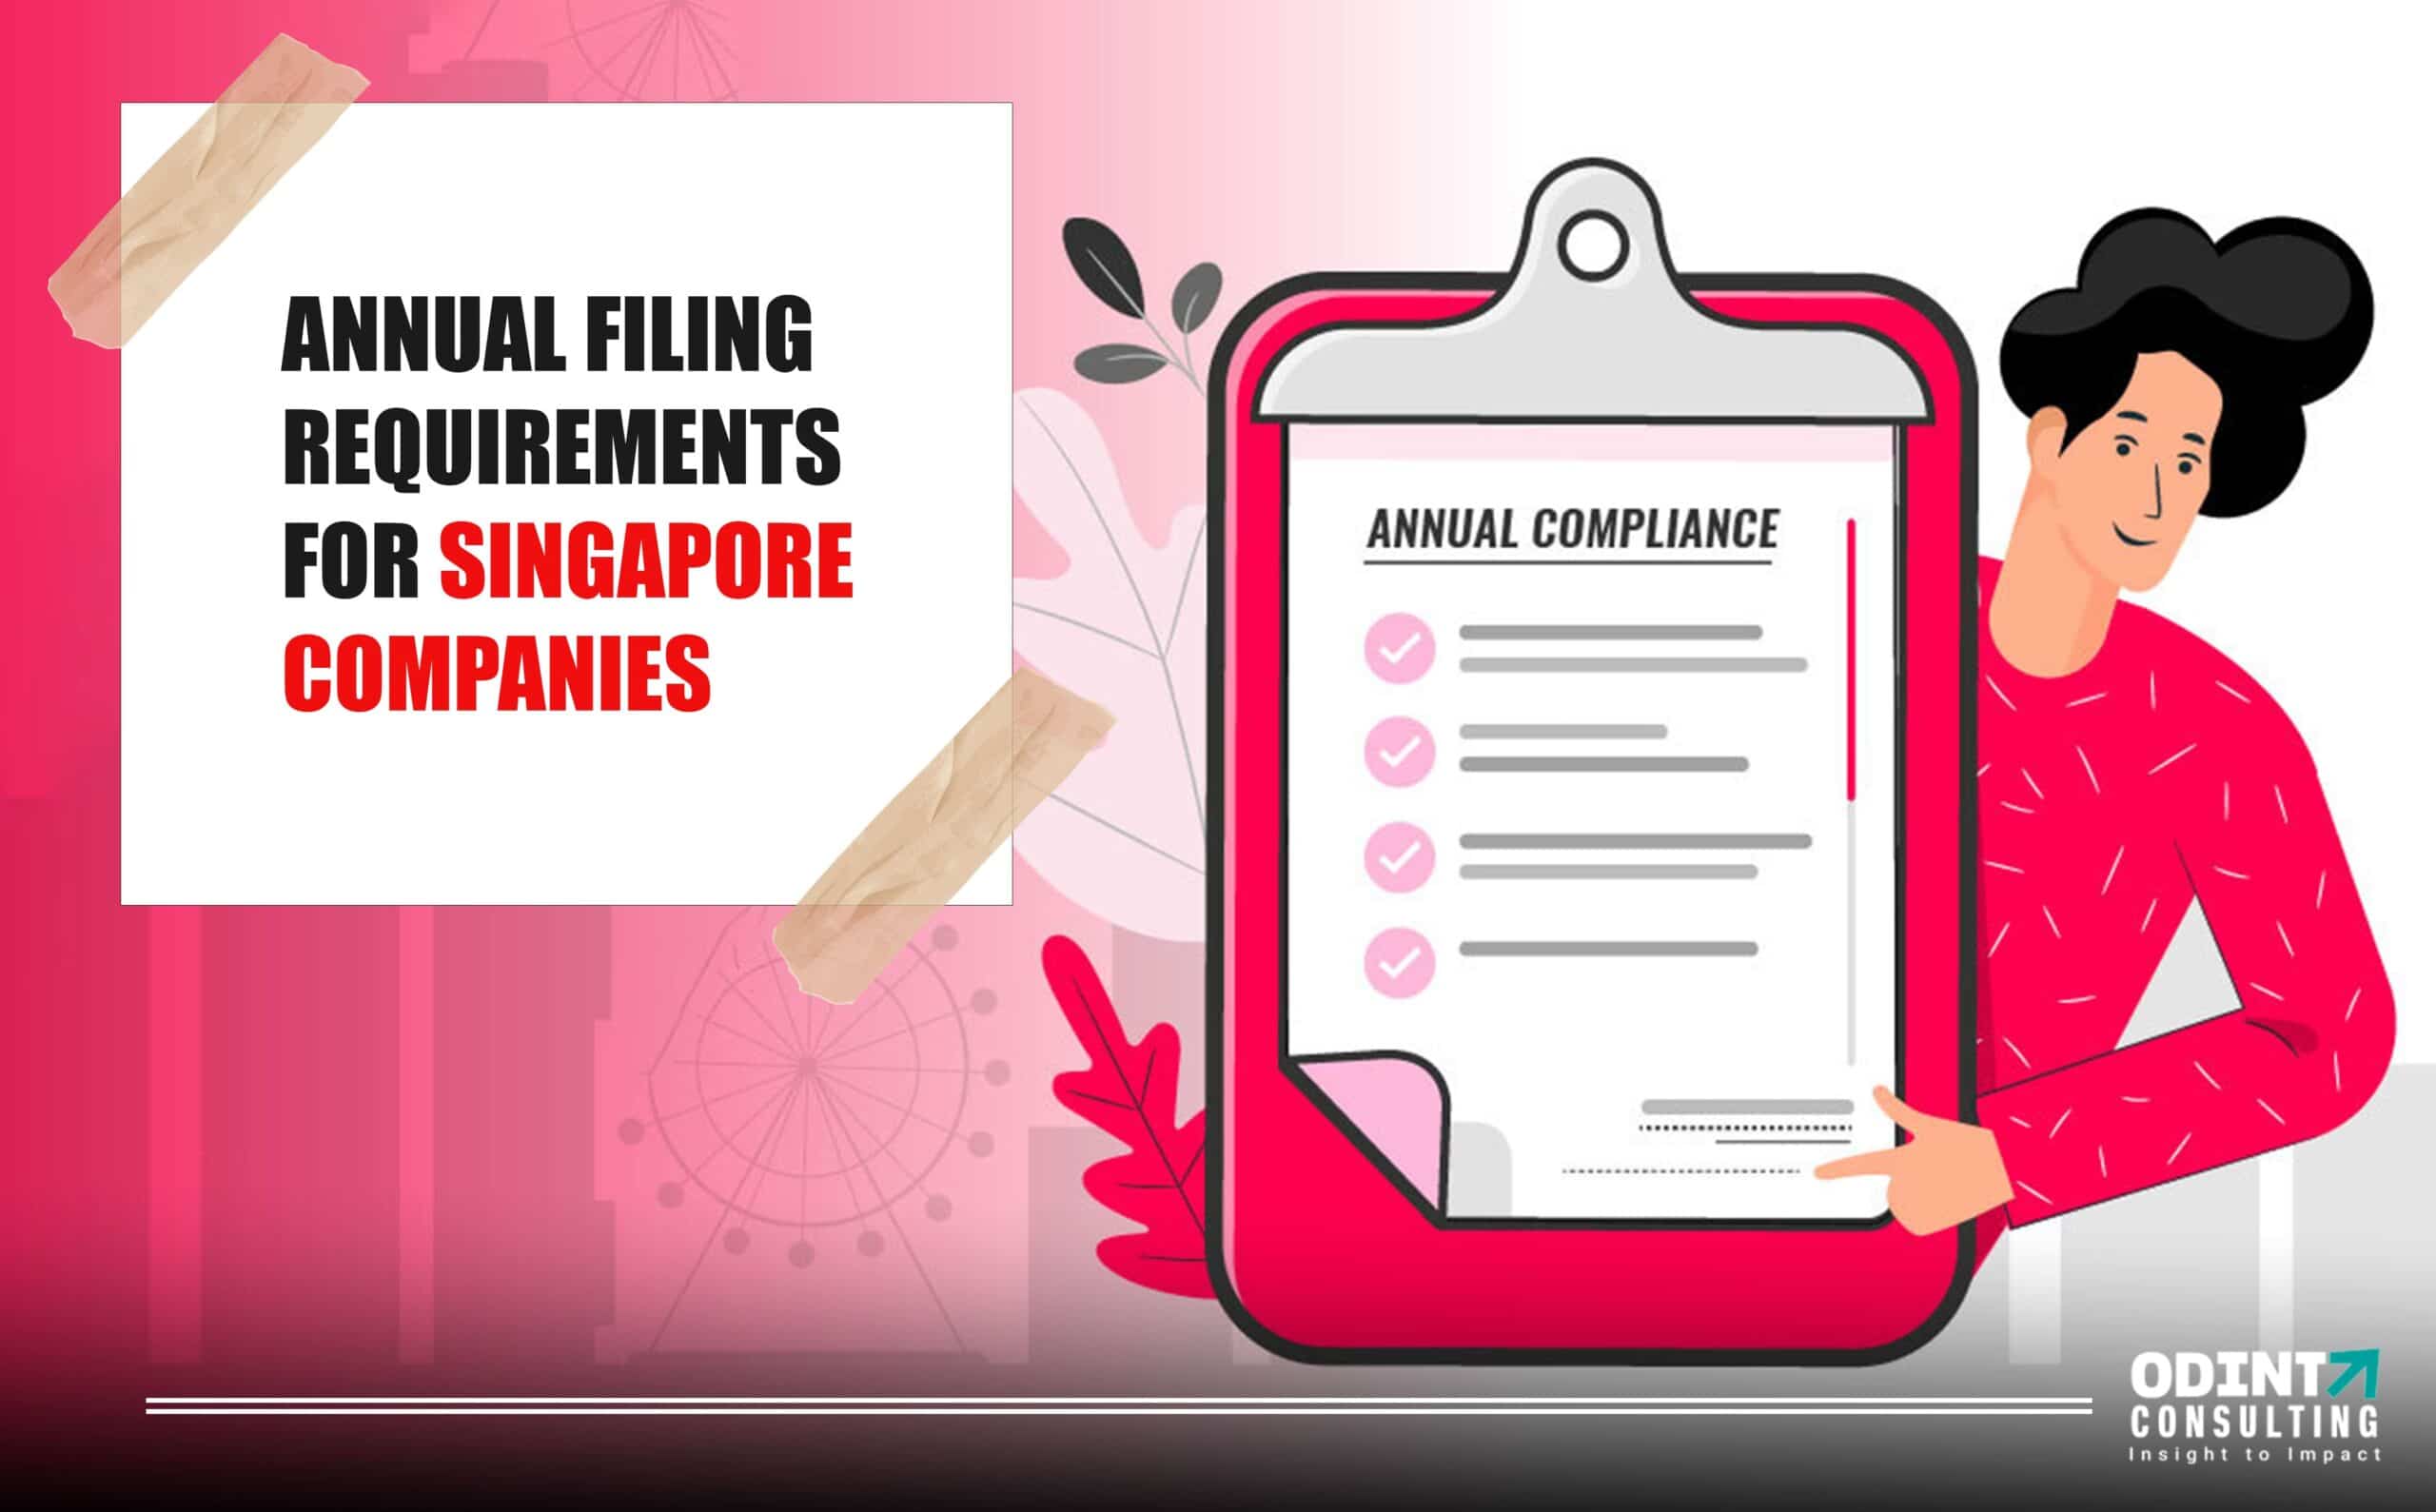 Annual Filing Requirements for Singapore Companies